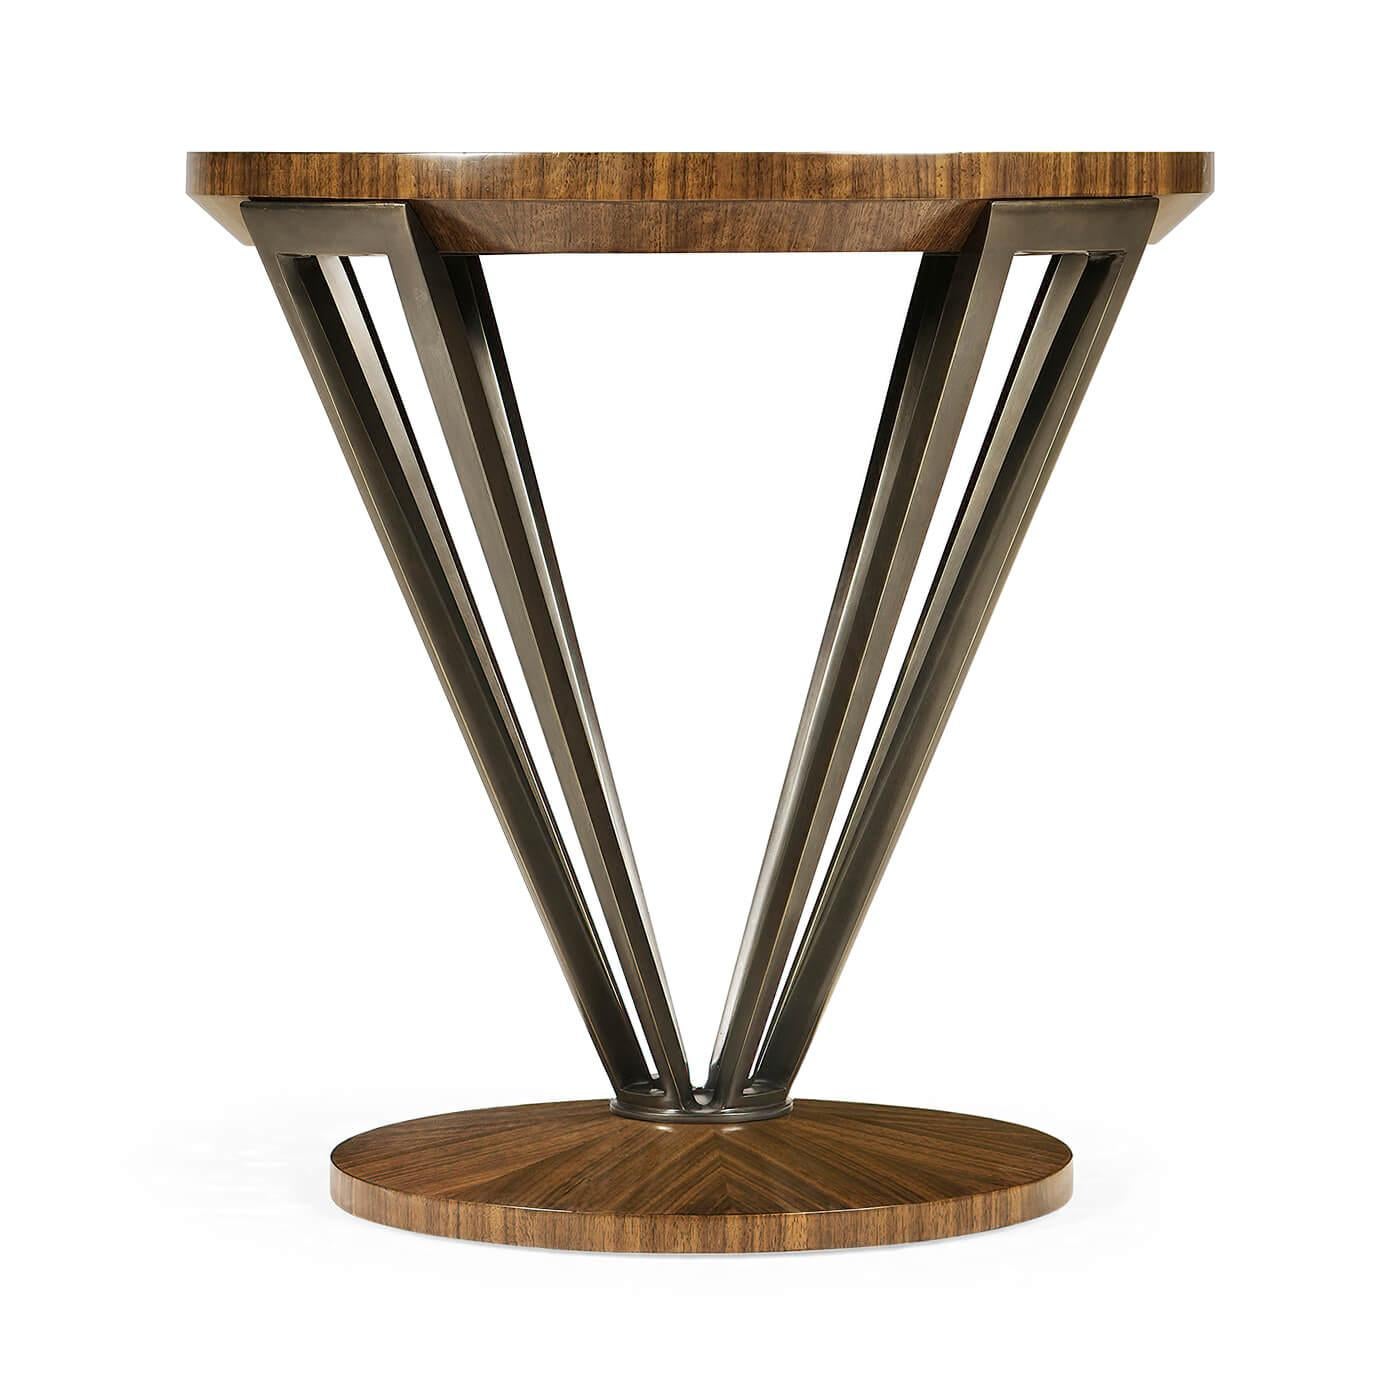 French Art Deco style end tables with a walnut rayed top with a transparent lacquer finish with a brass tapered pedestal having an acid dipped and hand-rubbed finish creating a wonderful soft patina.

Dimensions: 24